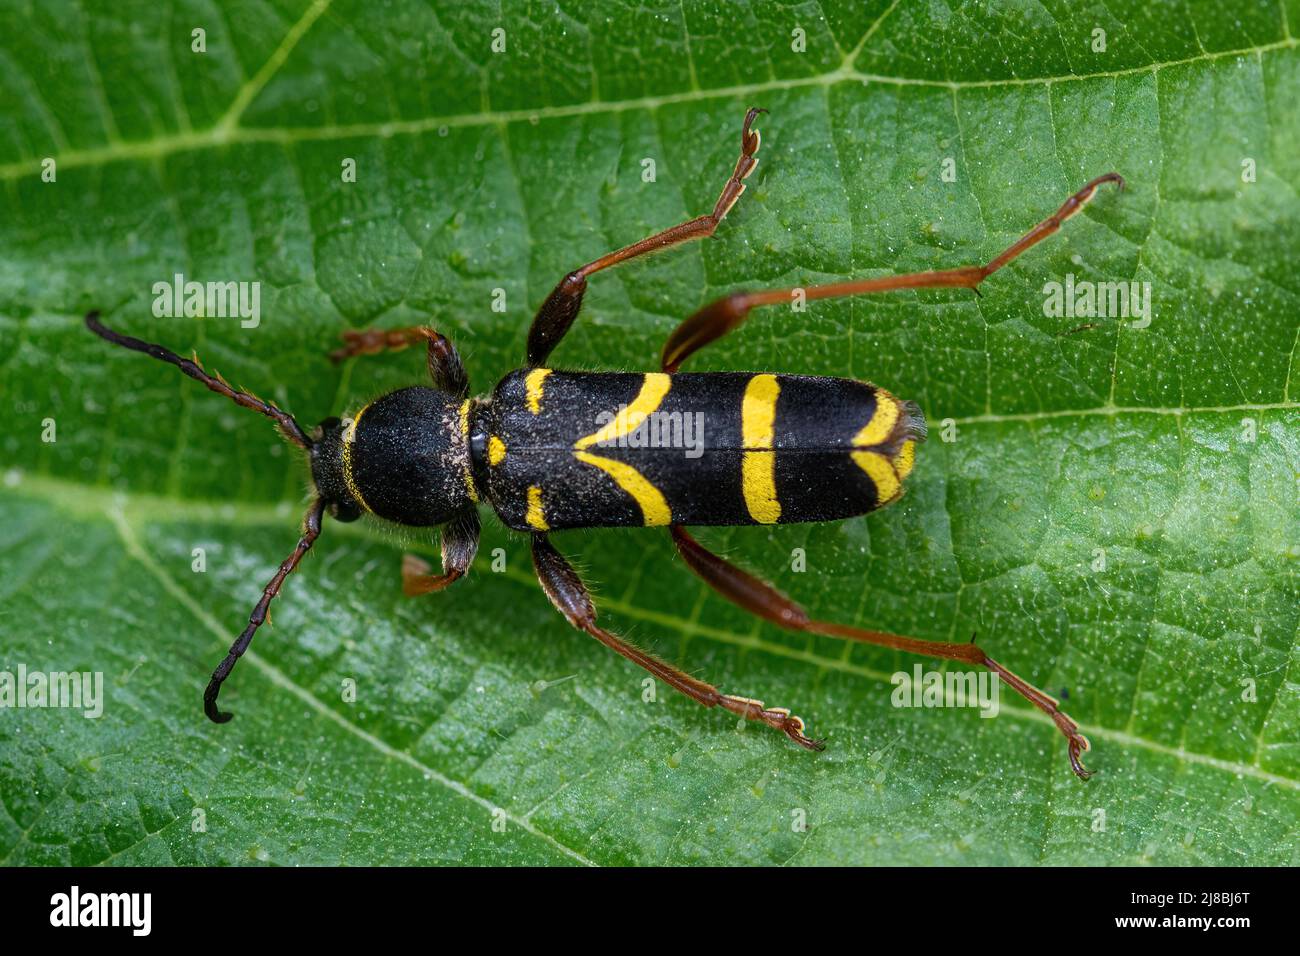 Wasp beetle Clytus arietis, a black and yellow longhorn beetle on nettles during May, UK Stock Photo